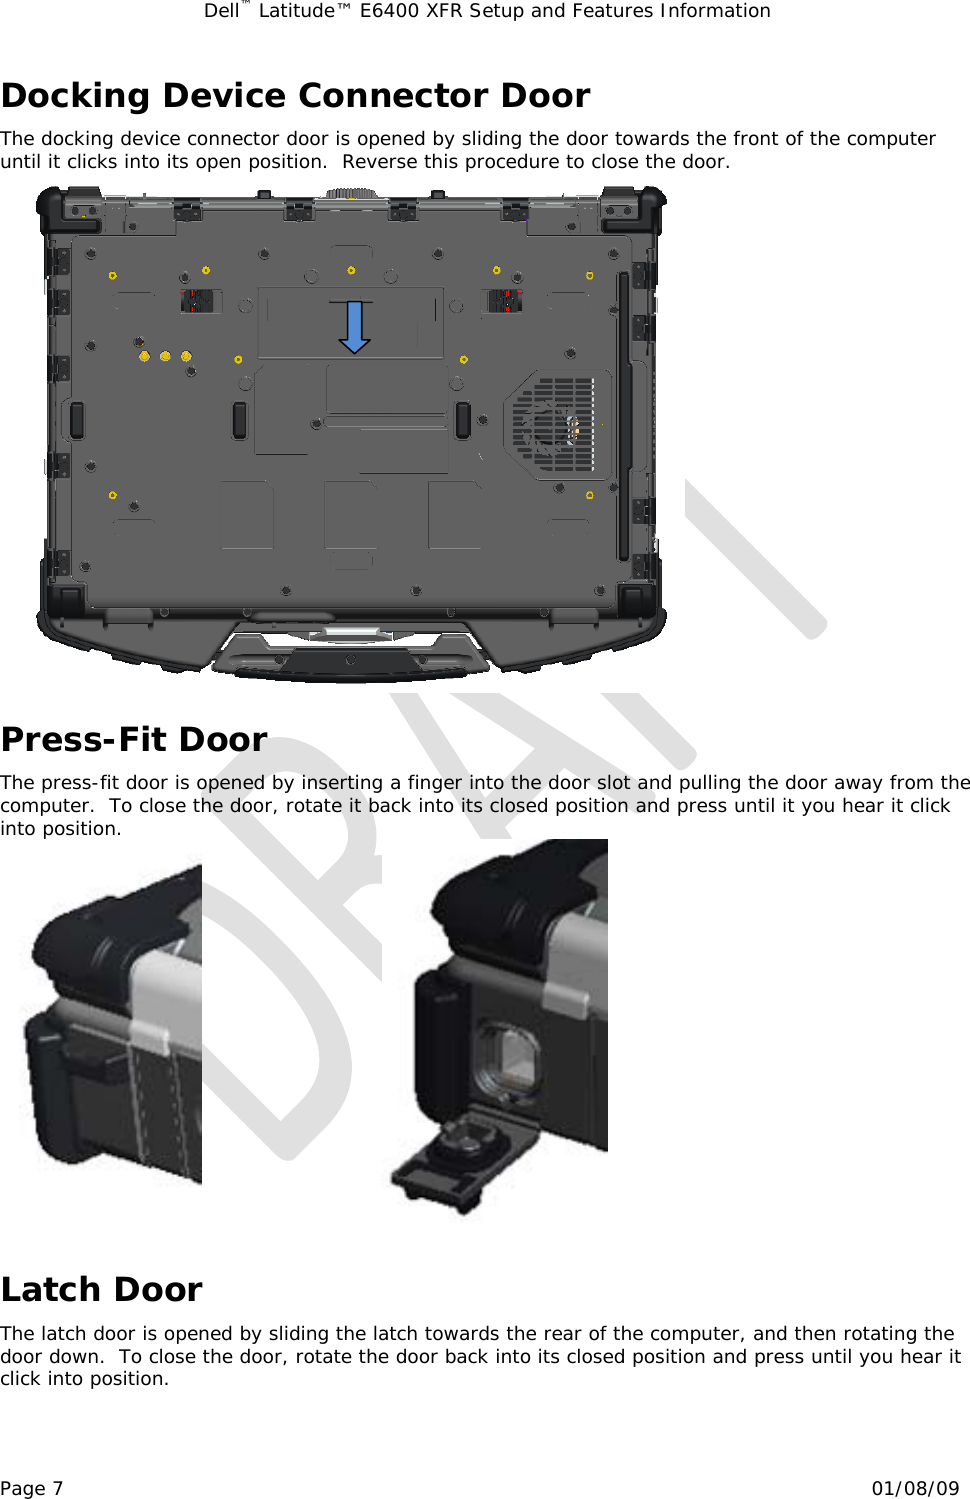 Dell™ Latitude™ E6400 XFR Setup and Features Information   Page 7                                                                                                01/08/09 Docking Device Connector Door The docking device connector door is opened by sliding the door towards the front of the computer until it clicks into its open position.  Reverse this procedure to close the door.  Press-Fit Door The press-fit door is opened by inserting a finger into the door slot and pulling the door away from the computer.  To close the door, rotate it back into its closed position and press until it you hear it click into position.                              Latch Door The latch door is opened by sliding the latch towards the rear of the computer, and then rotating the door down.  To close the door, rotate the door back into its closed position and press until you hear it click into position. 